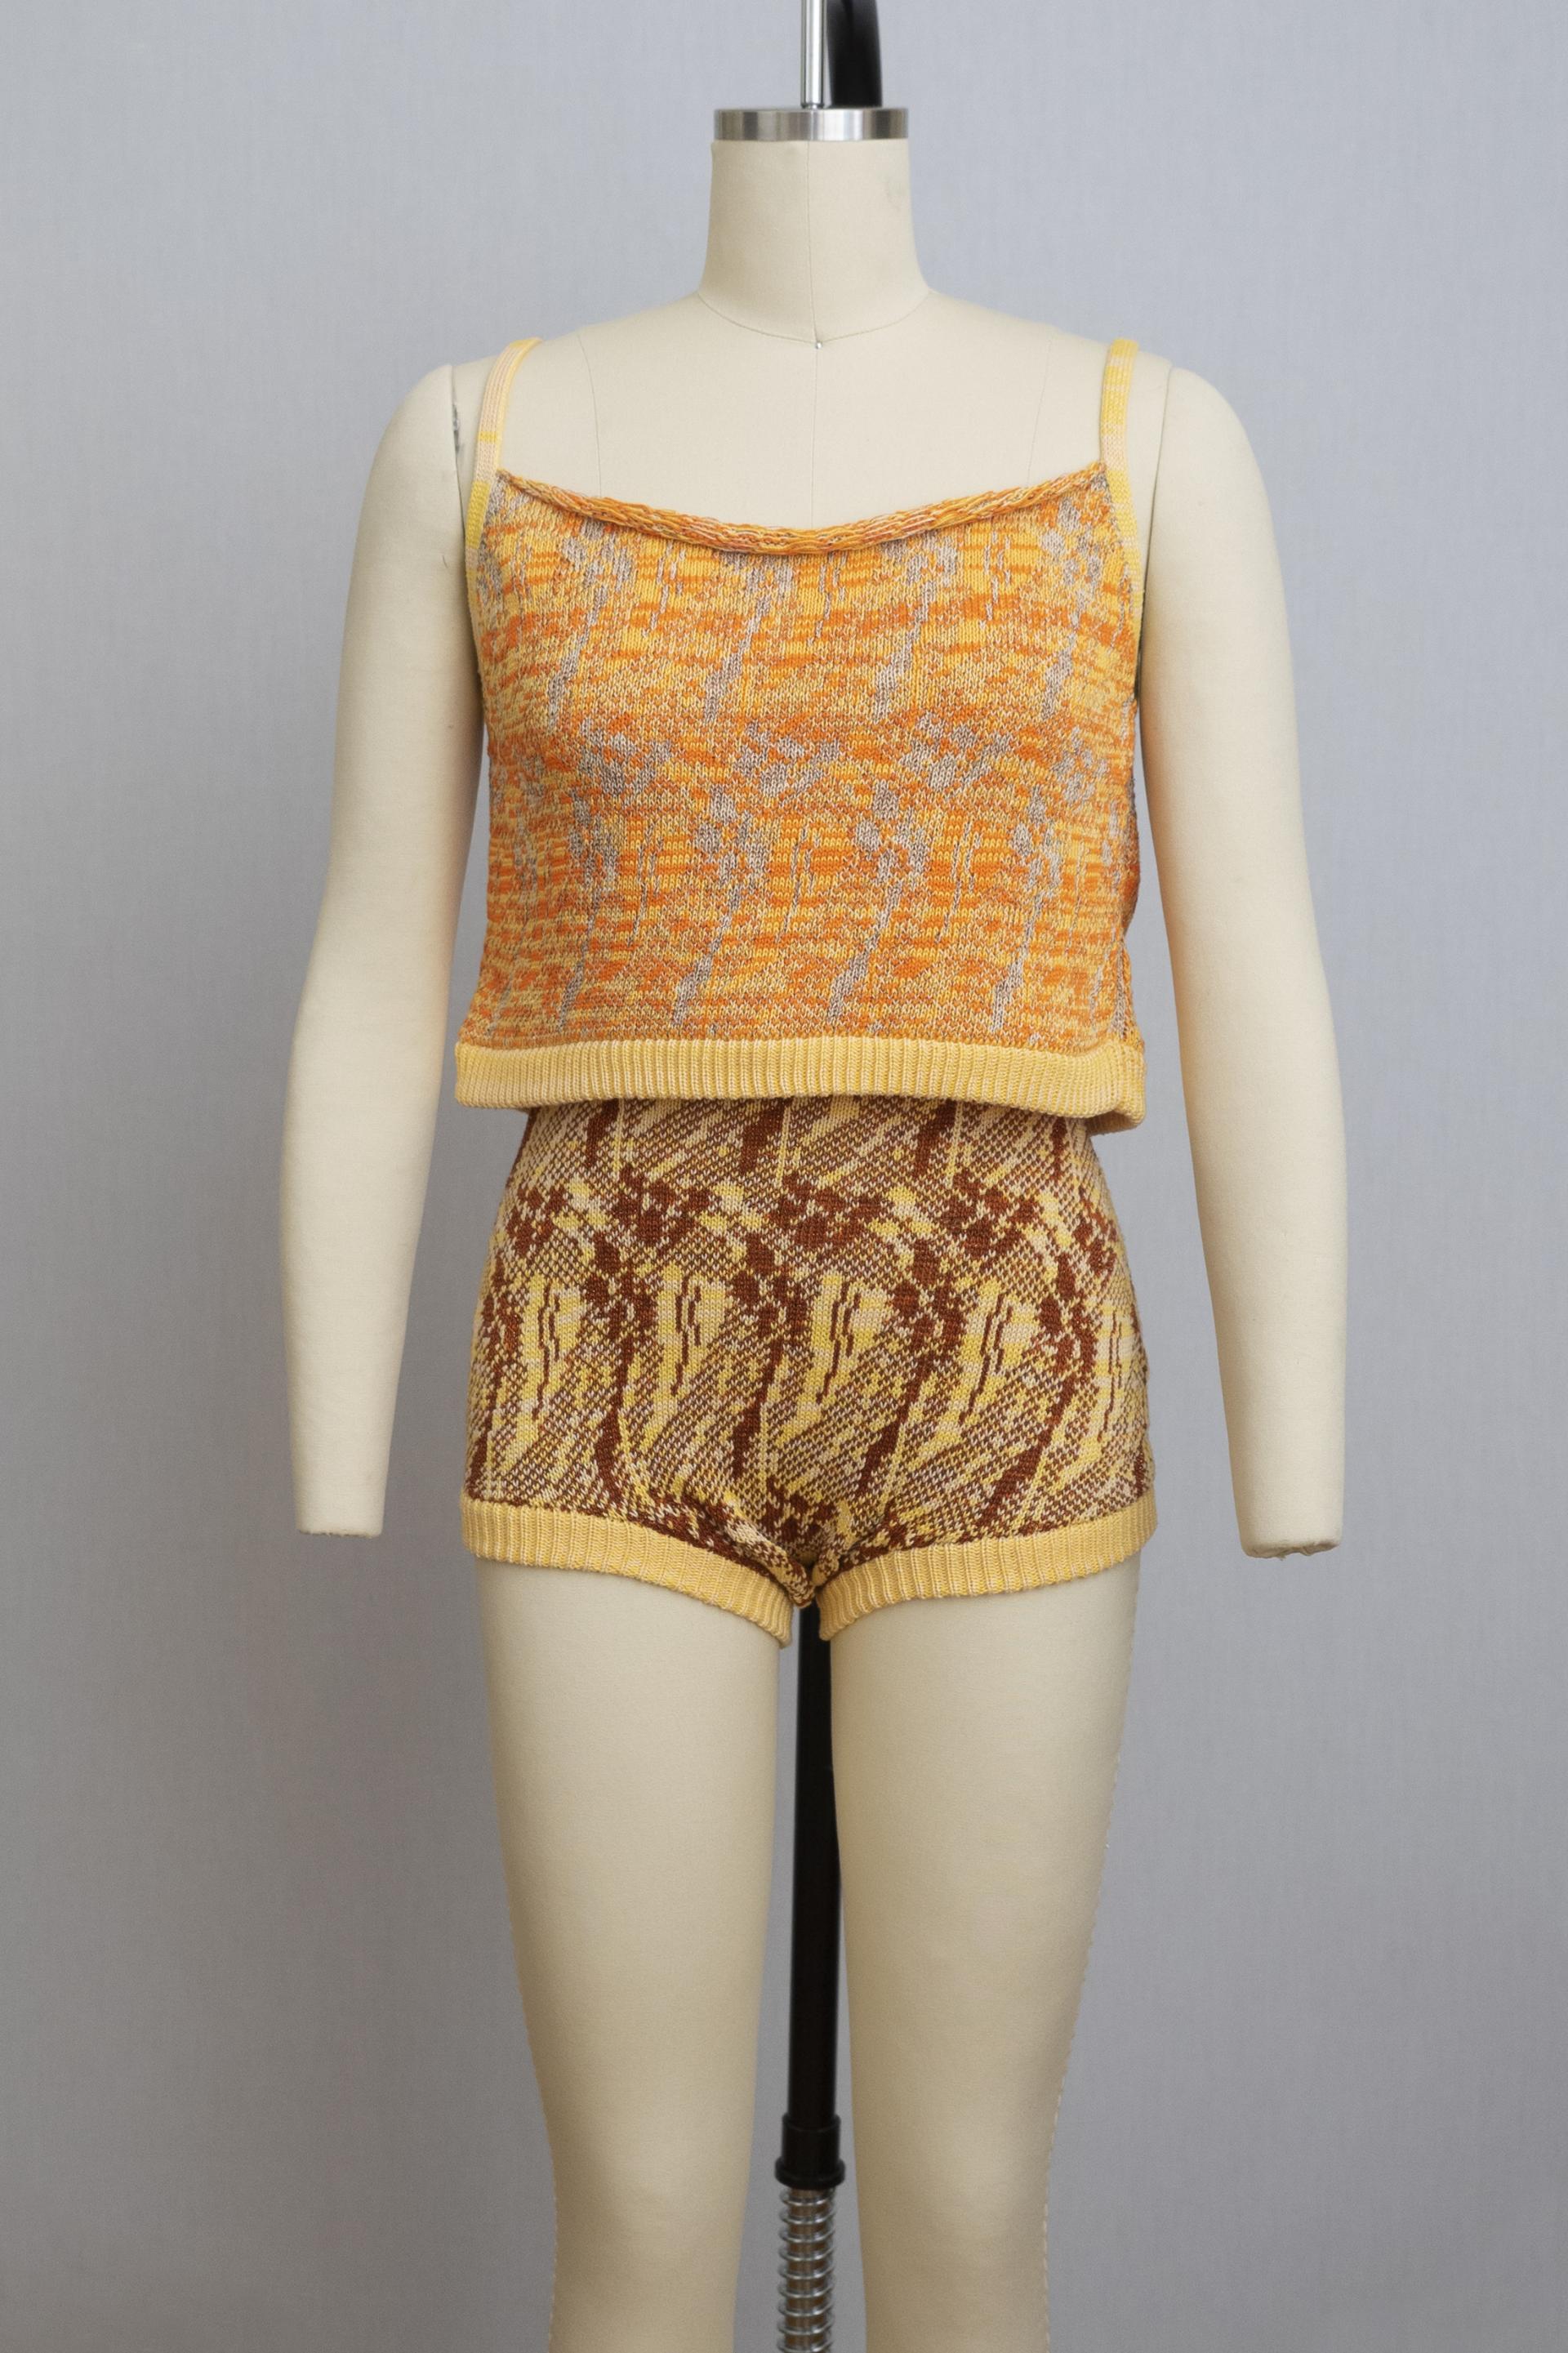 dress form wearing a knit playsuit in oranges and yellows